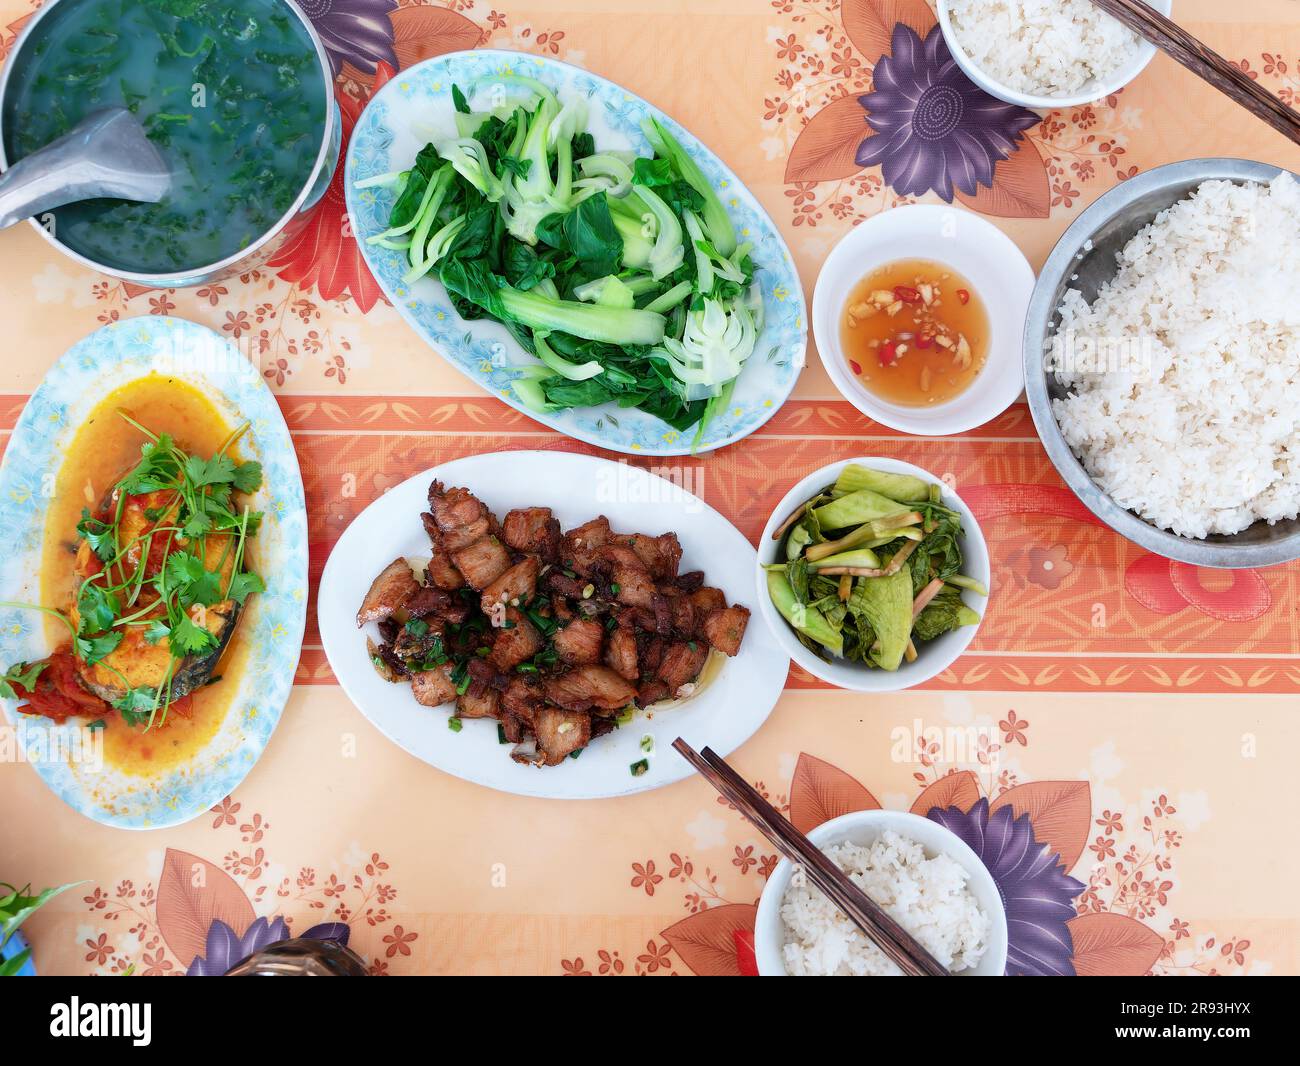 Lunch table set for two persons at a local restaurant in Thanh Hoa, Vietnam, with rice, vegetables, fish, meat, condiments and a soup. Stock Photo